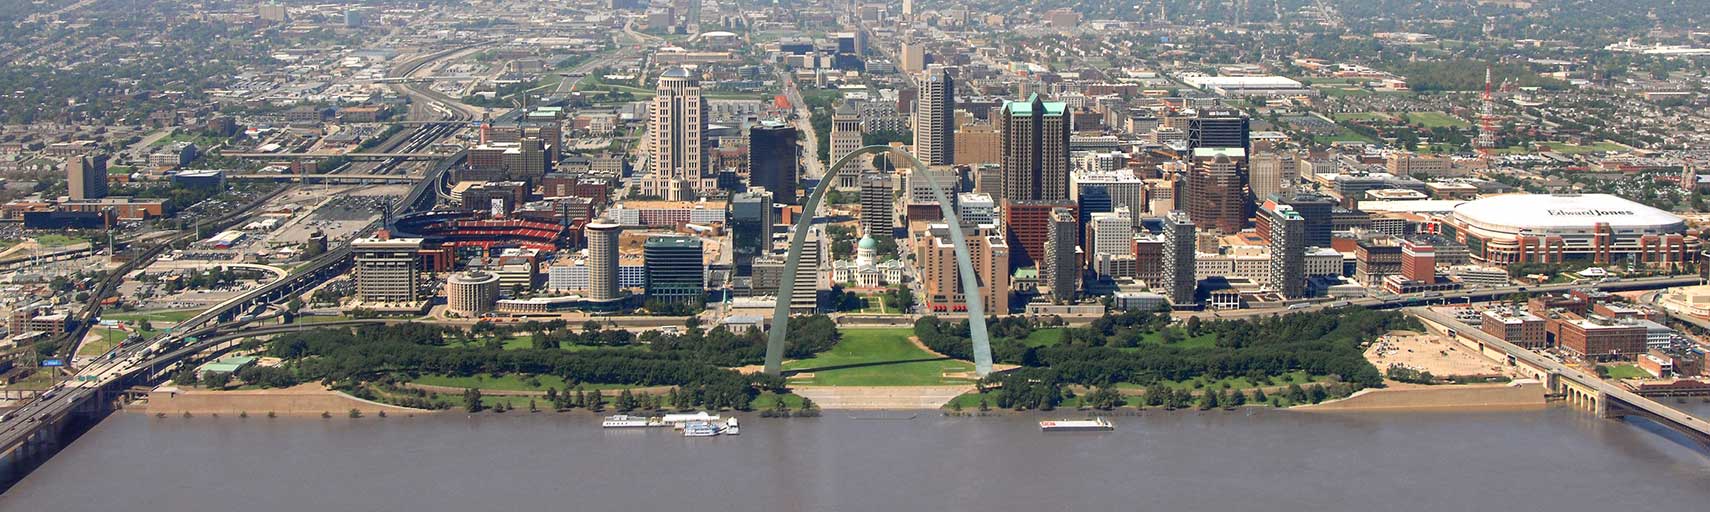 Aerial view of St. Louis Gateway Arch and St. Louis Central Business District on the riverbank of the Mississippi